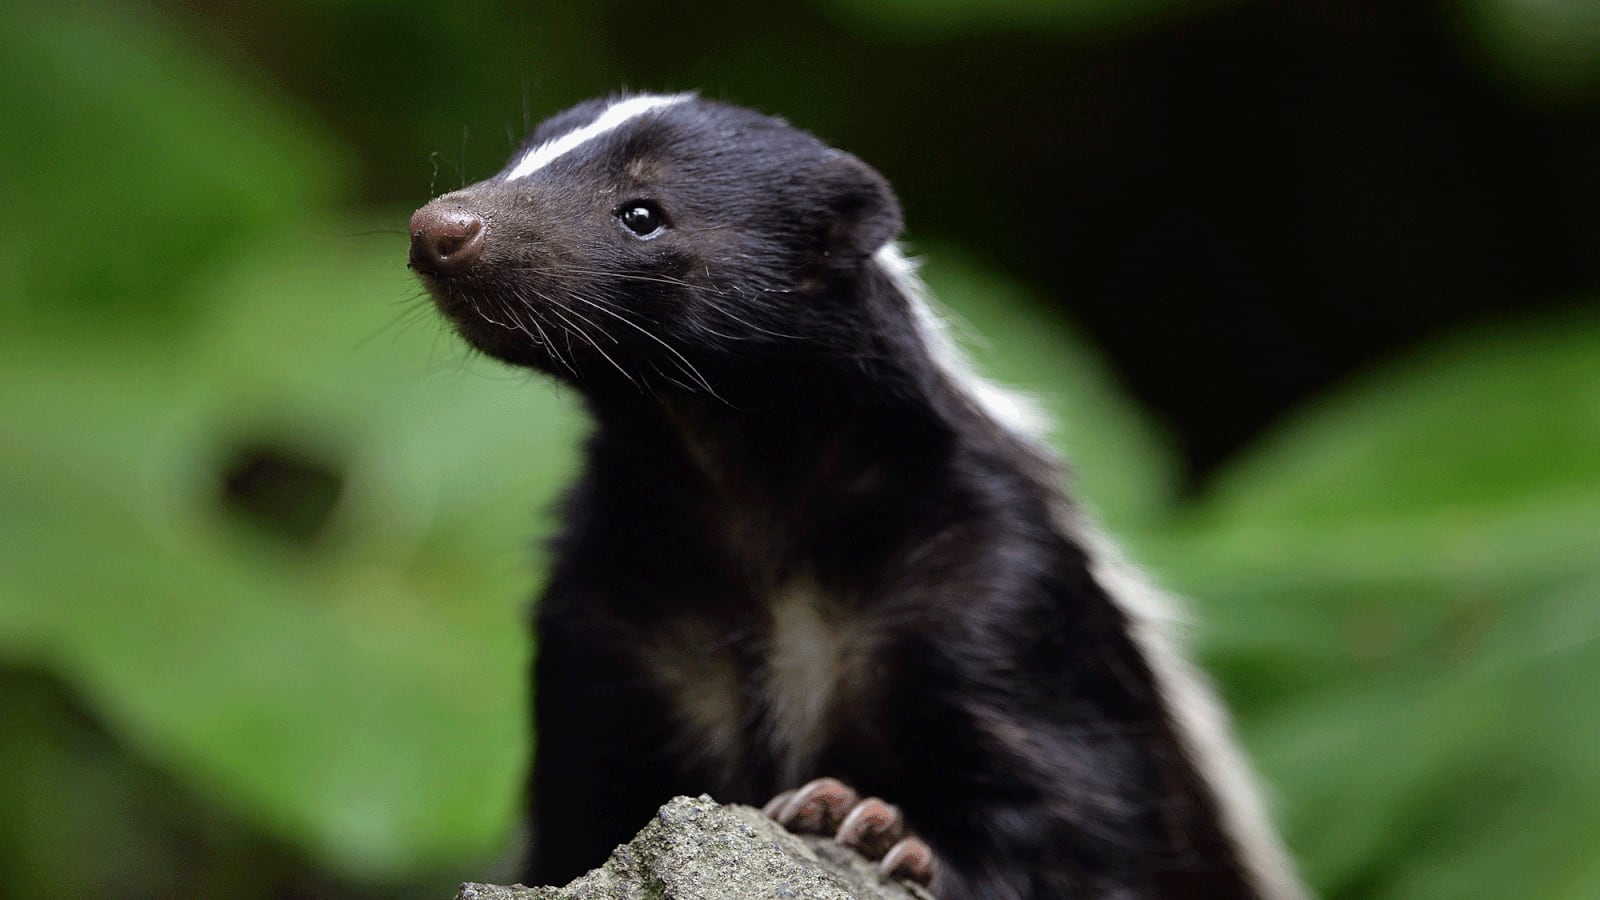 Skunk in West Bloomfield tests positive for rabies